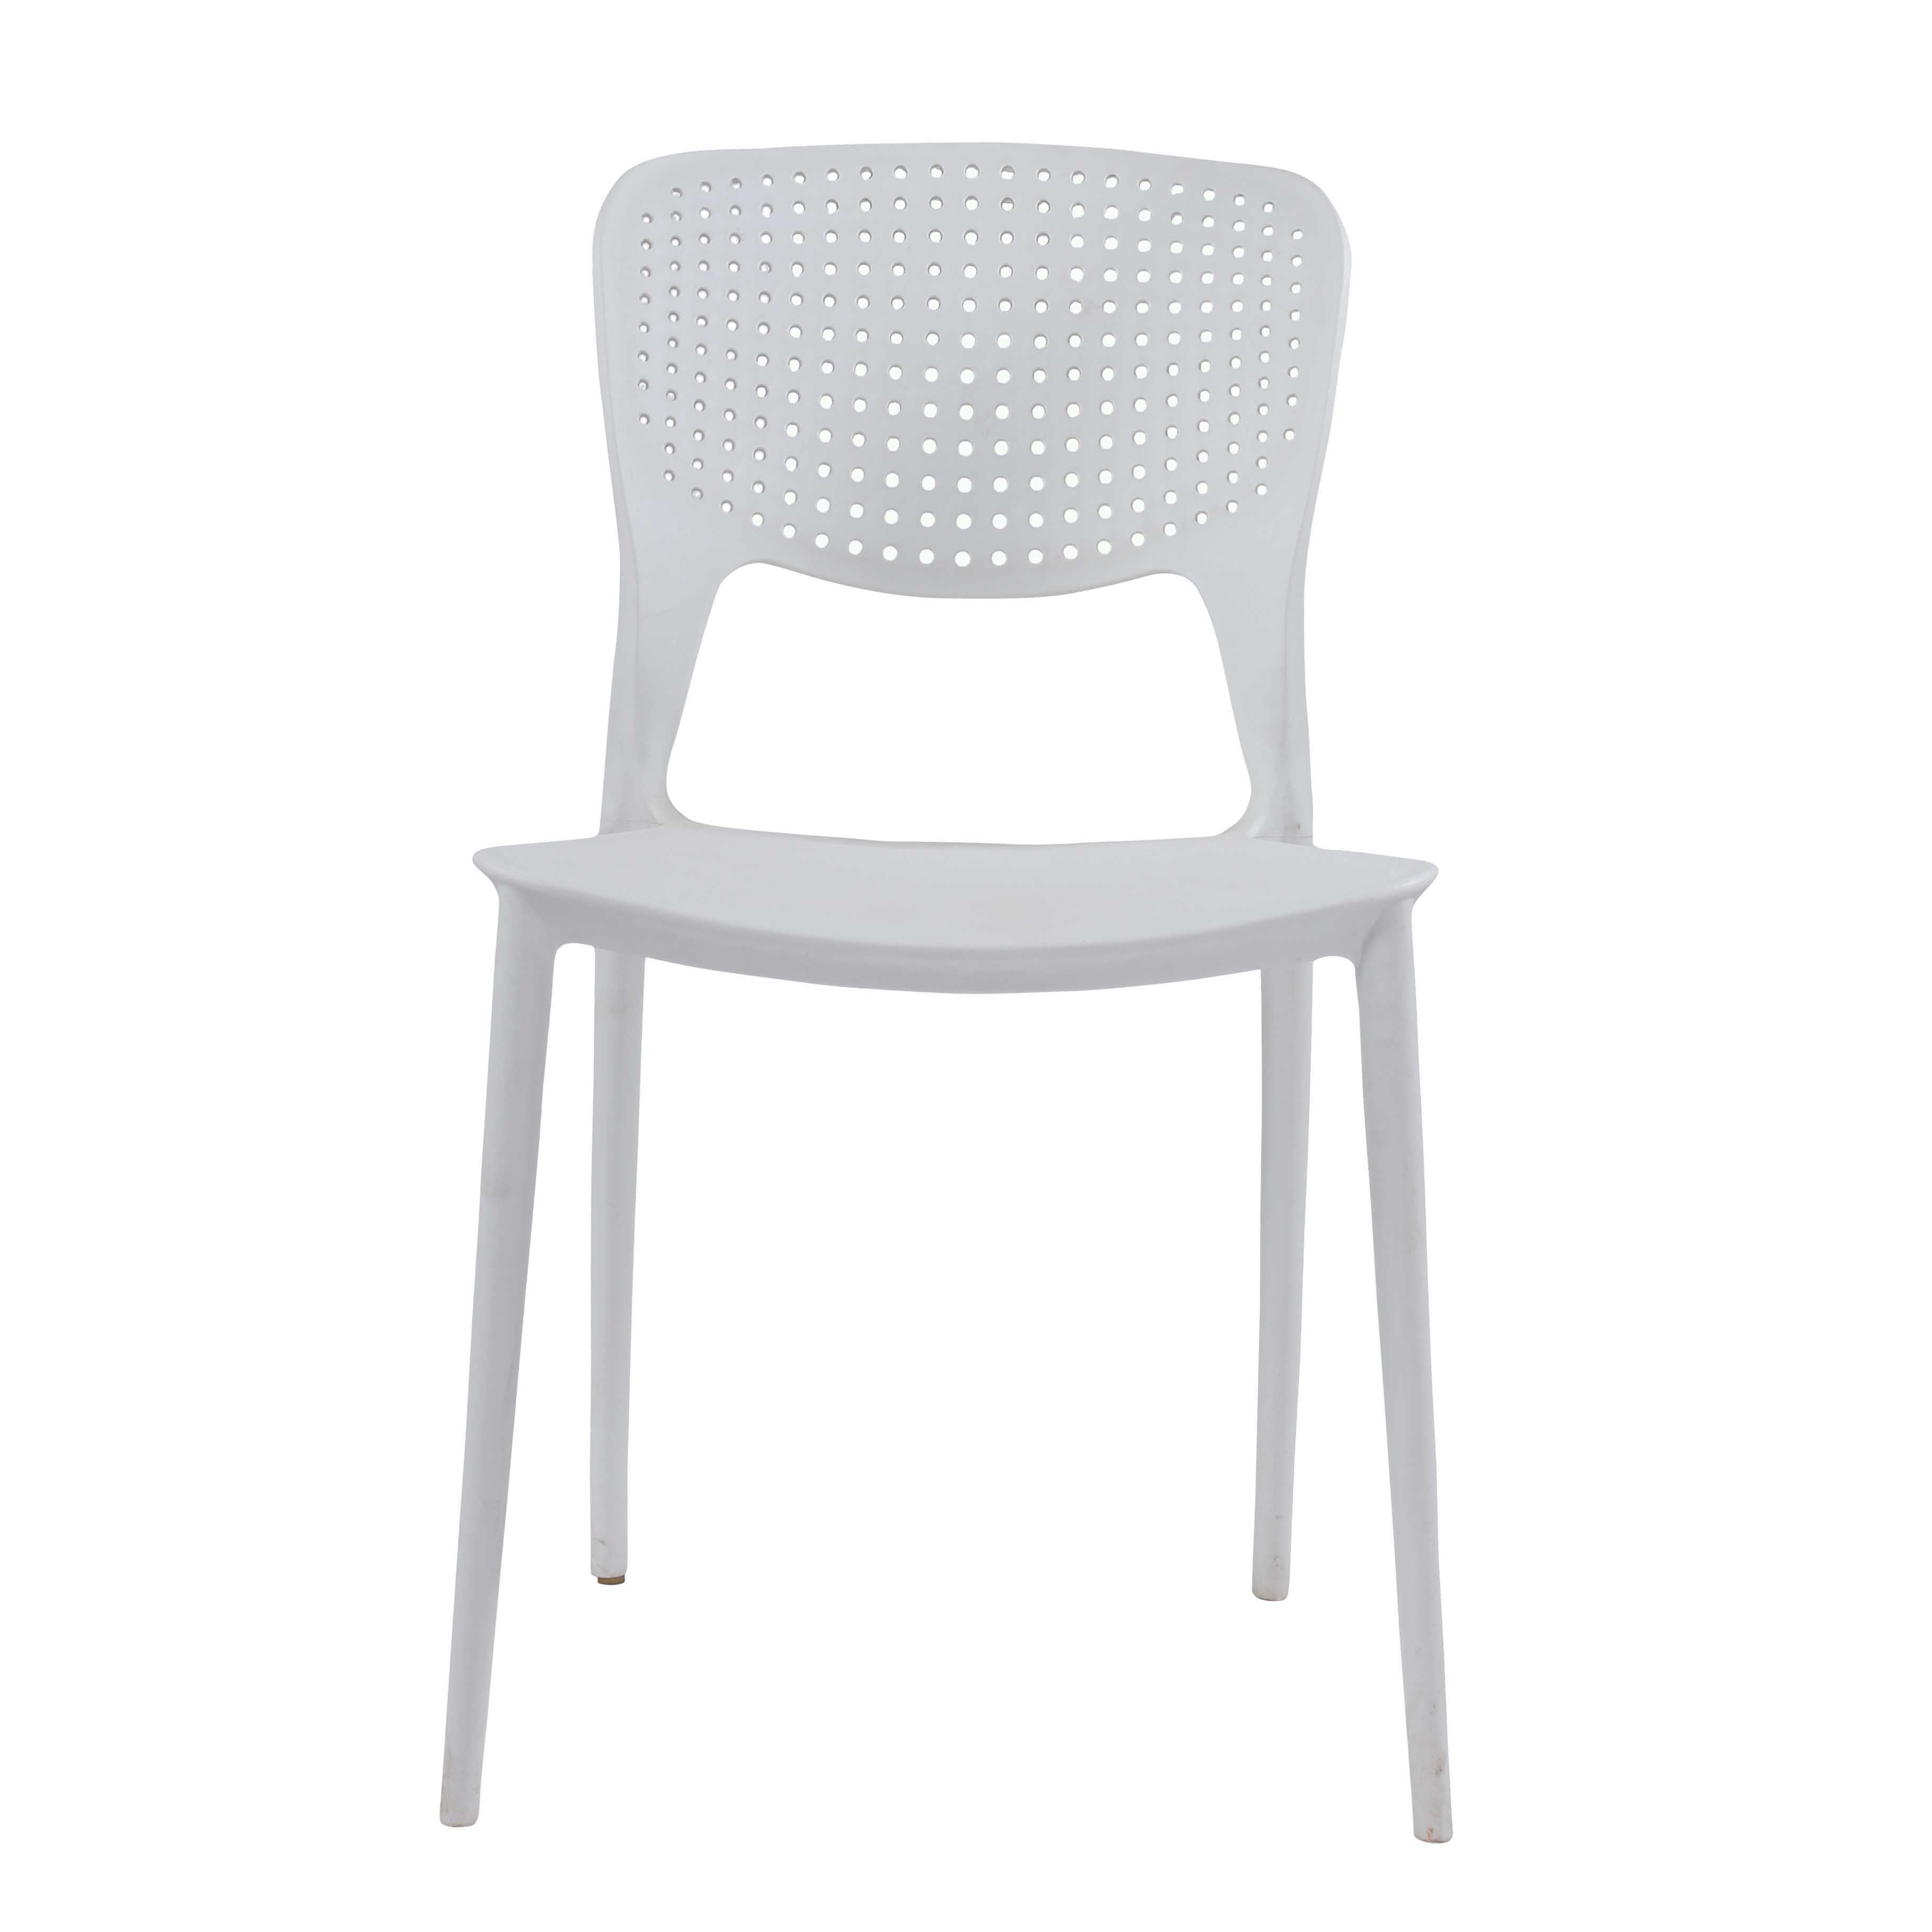 Kent Armless Heavy-Duty Plastic Dining Chair For Outdoor, Cafeteria, Balcony – White